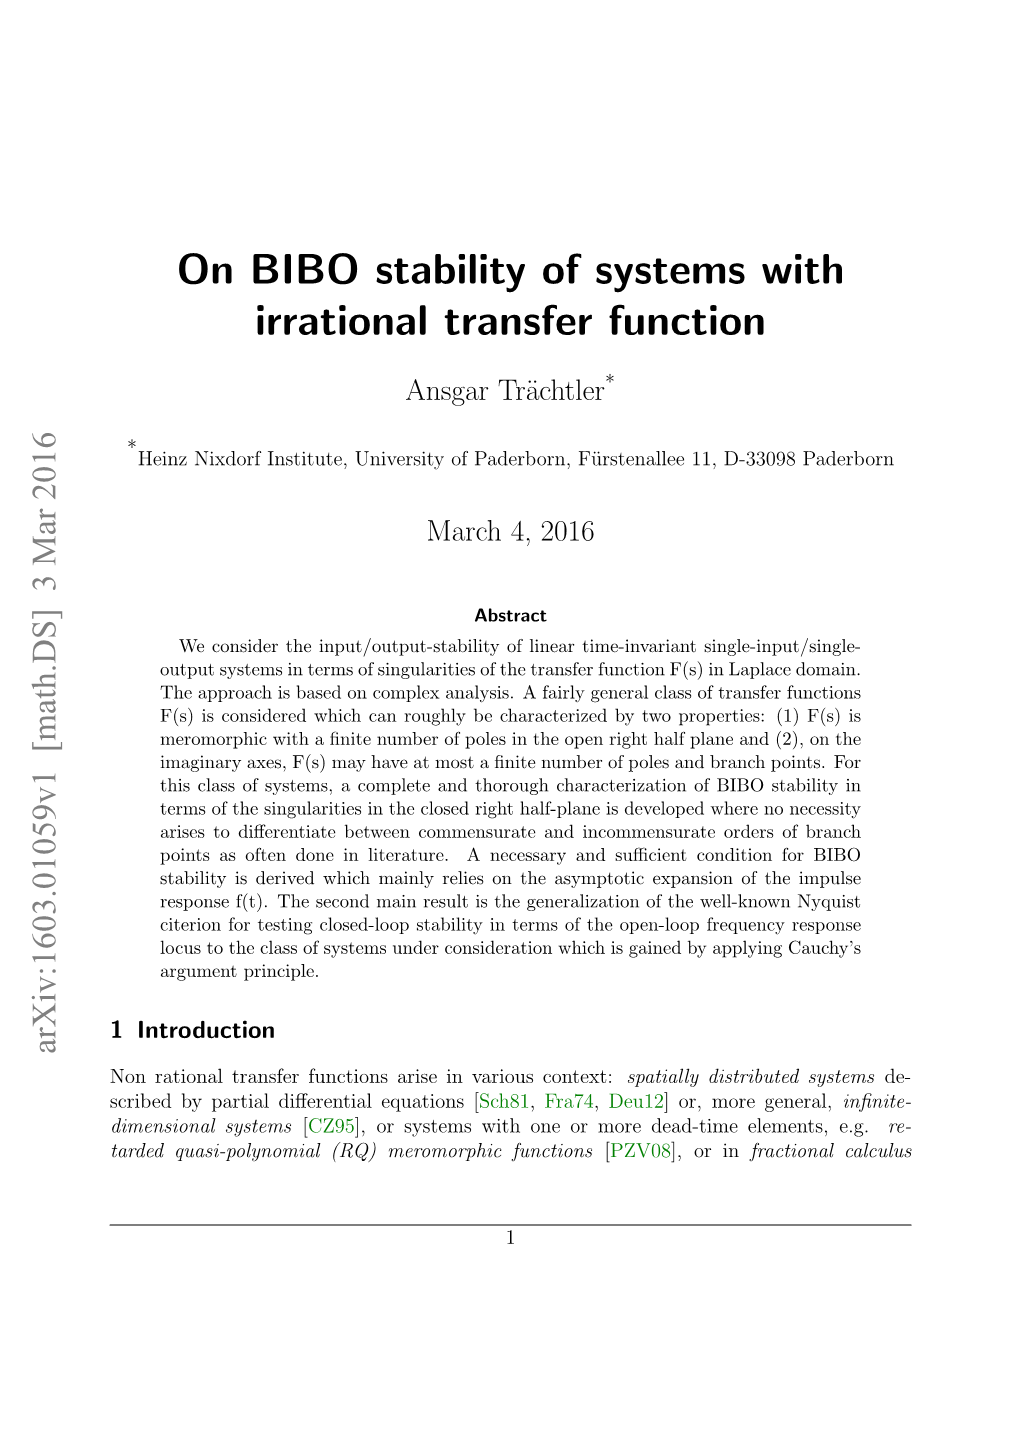 On BIBO Stability of Systems with Irrational Transfer Function